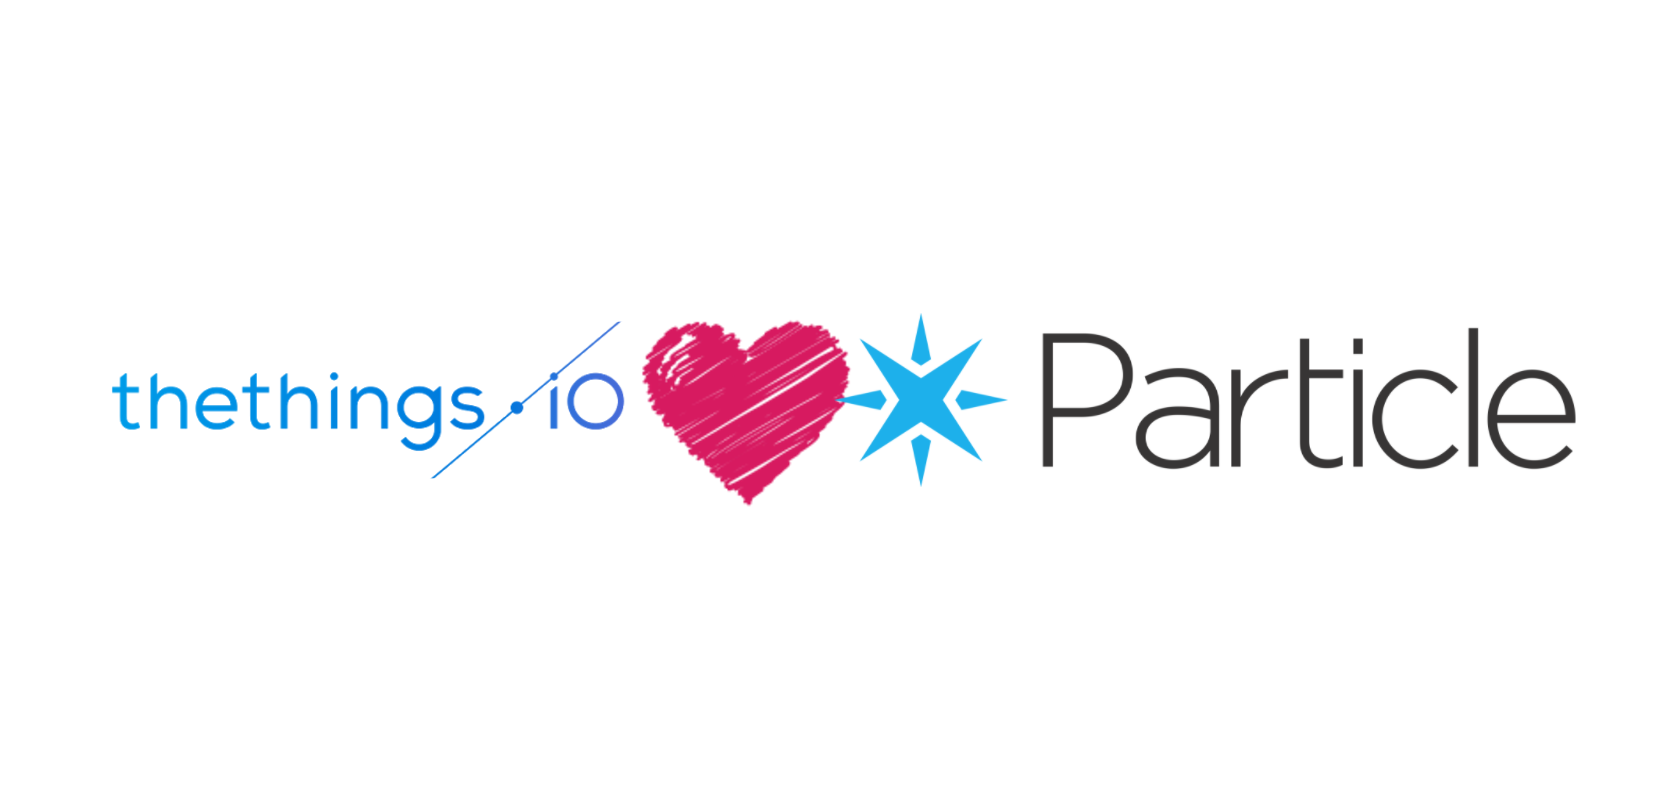 Particle loves thethings.iO IoT platform